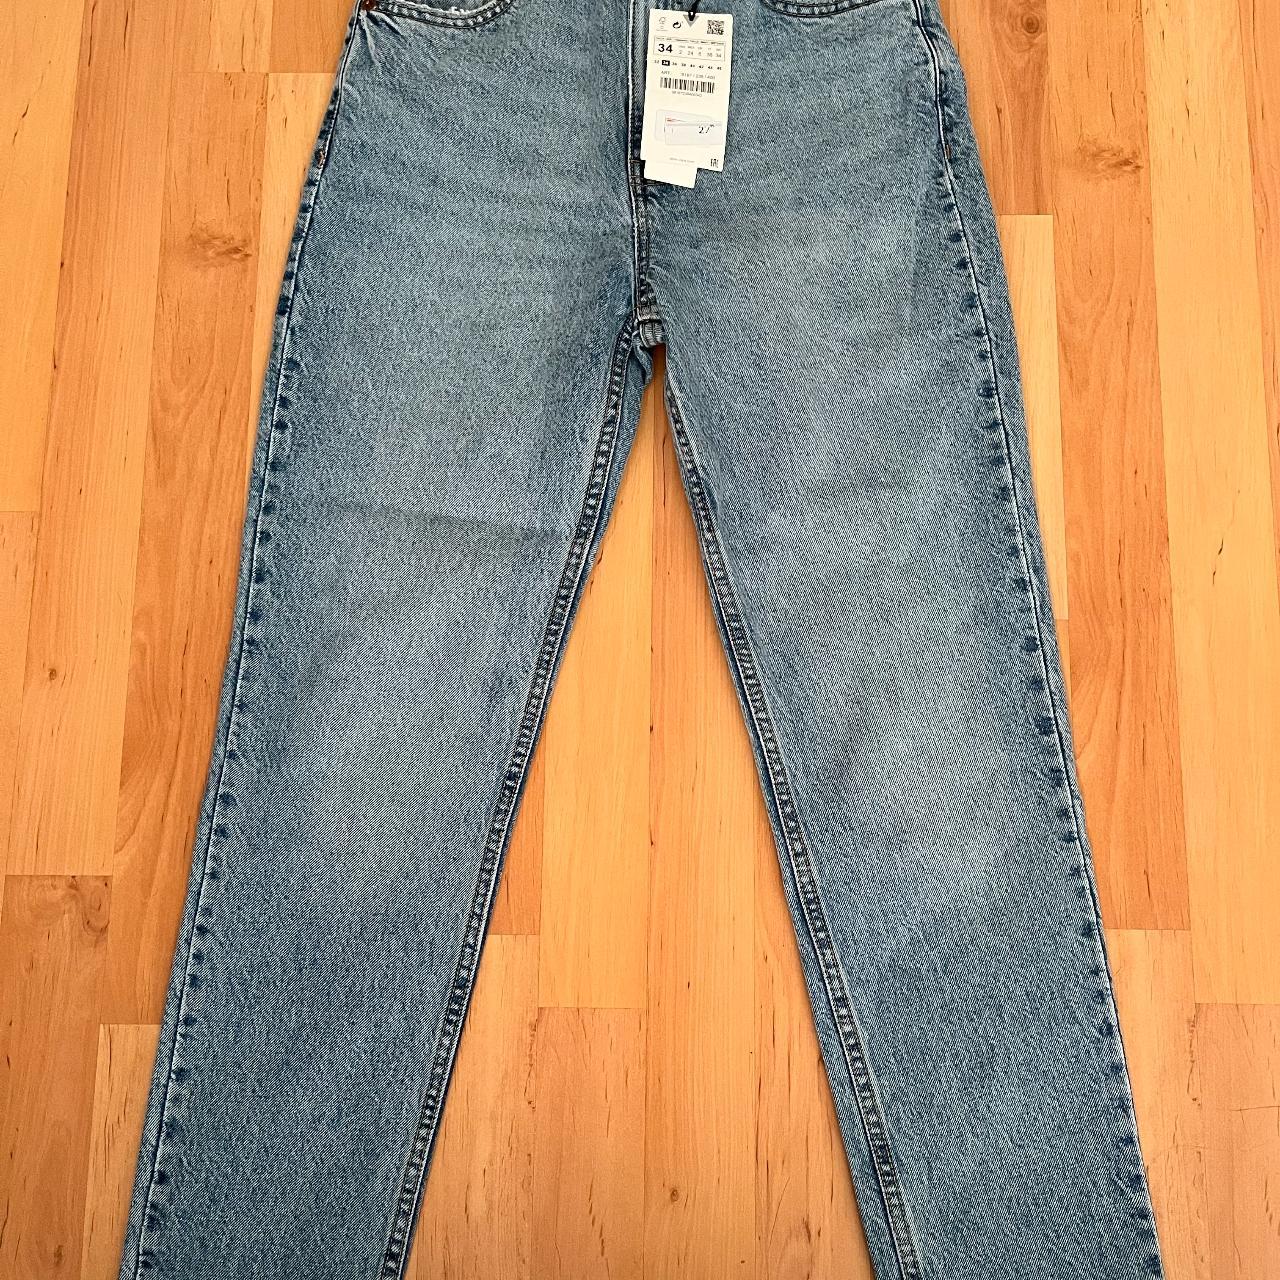 ZARA HIGH RISE ANKLE LENGHT MOM JEANS